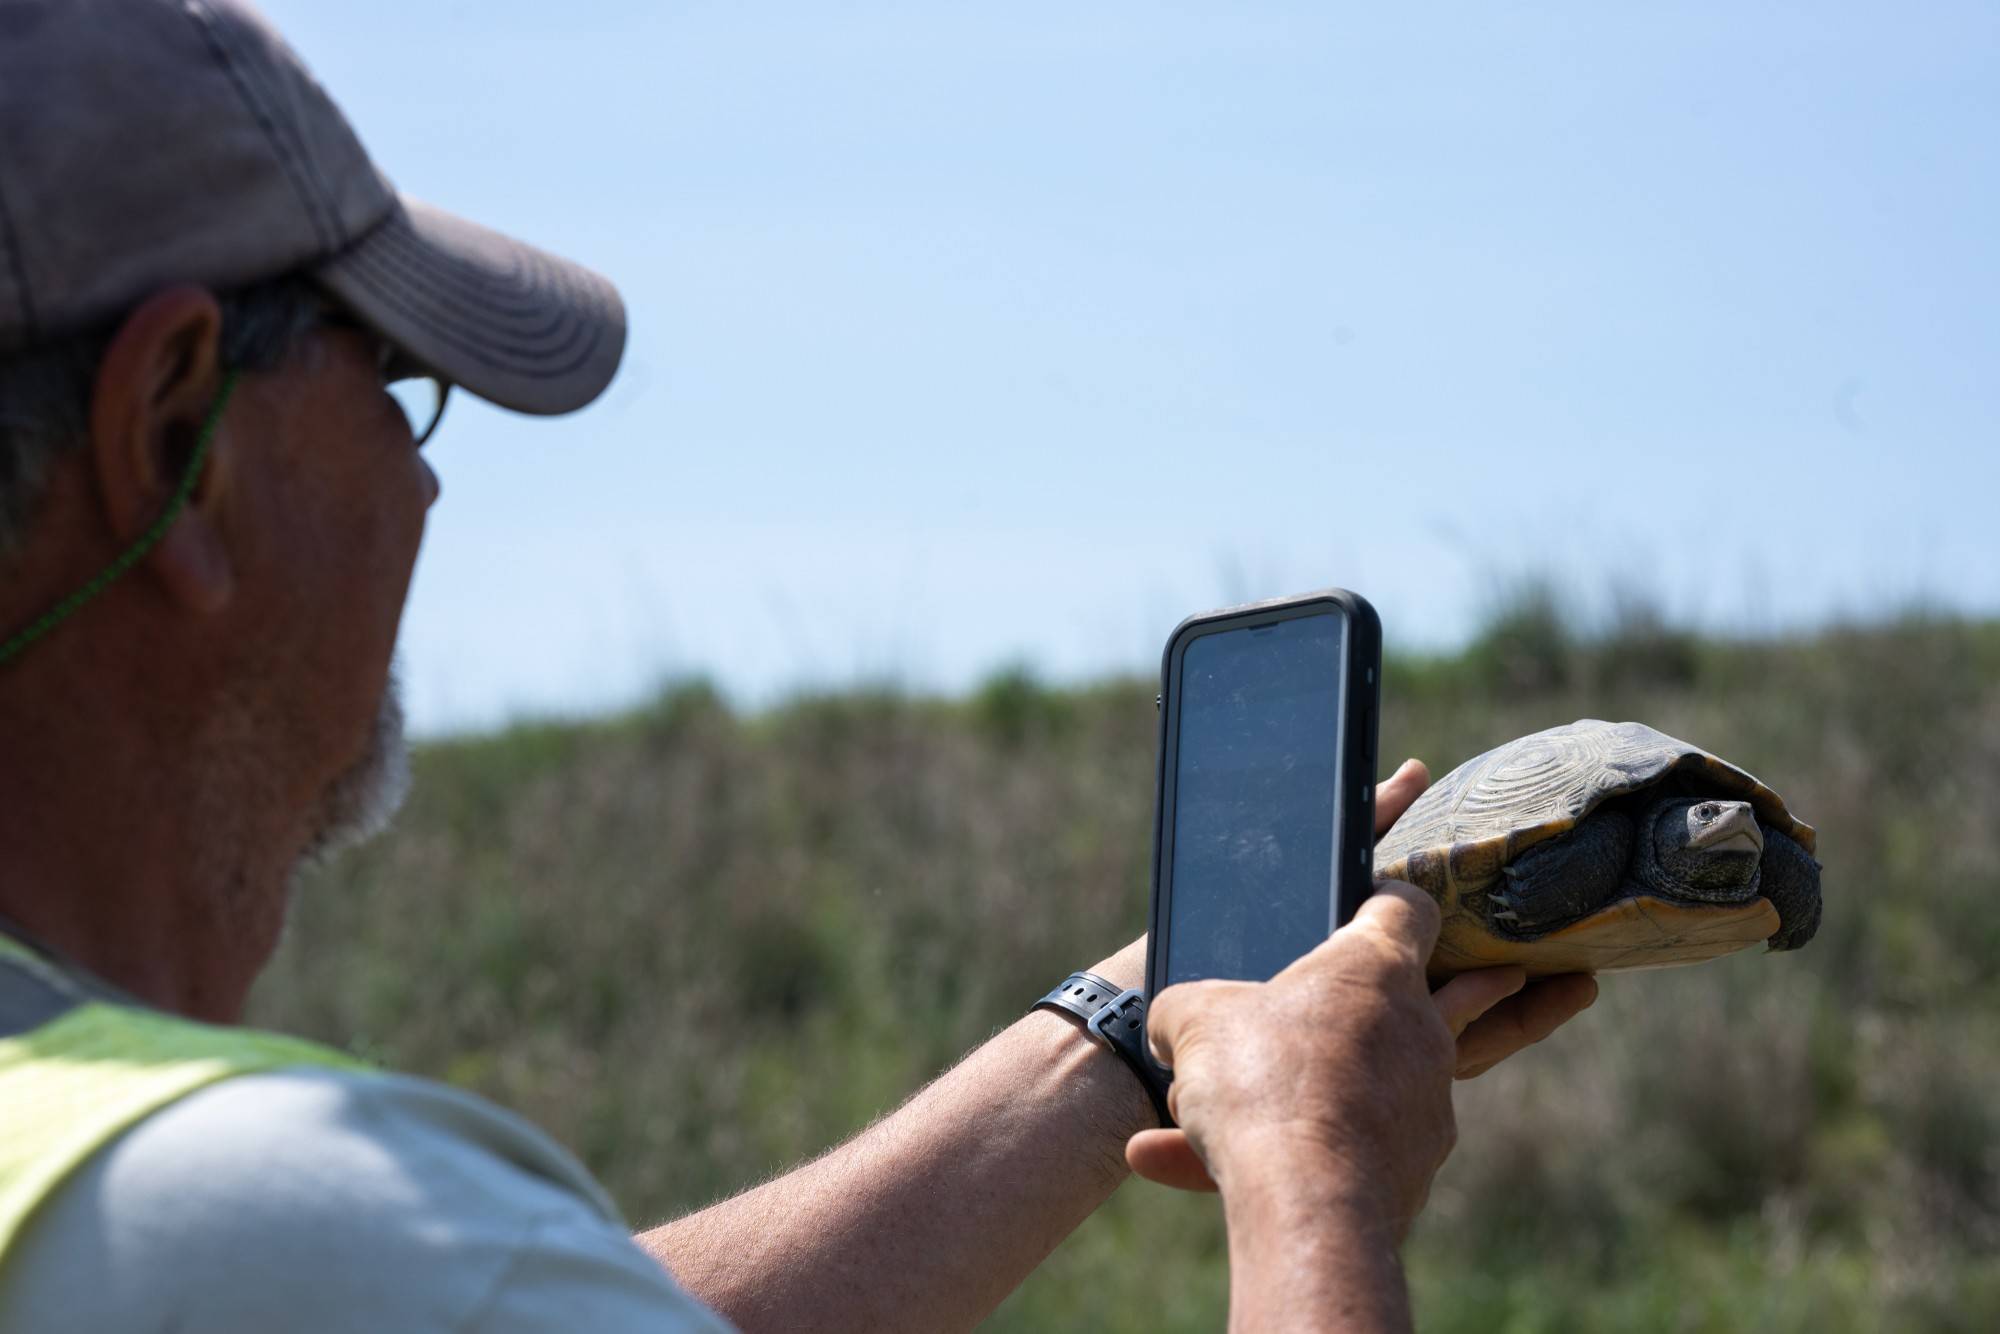 Dr. Roosenberg photographs a turtle that was recaptured several years after being release by K- 12 students. Roosenberg shares the photos with the teachers and students via his lab's Facebook page.